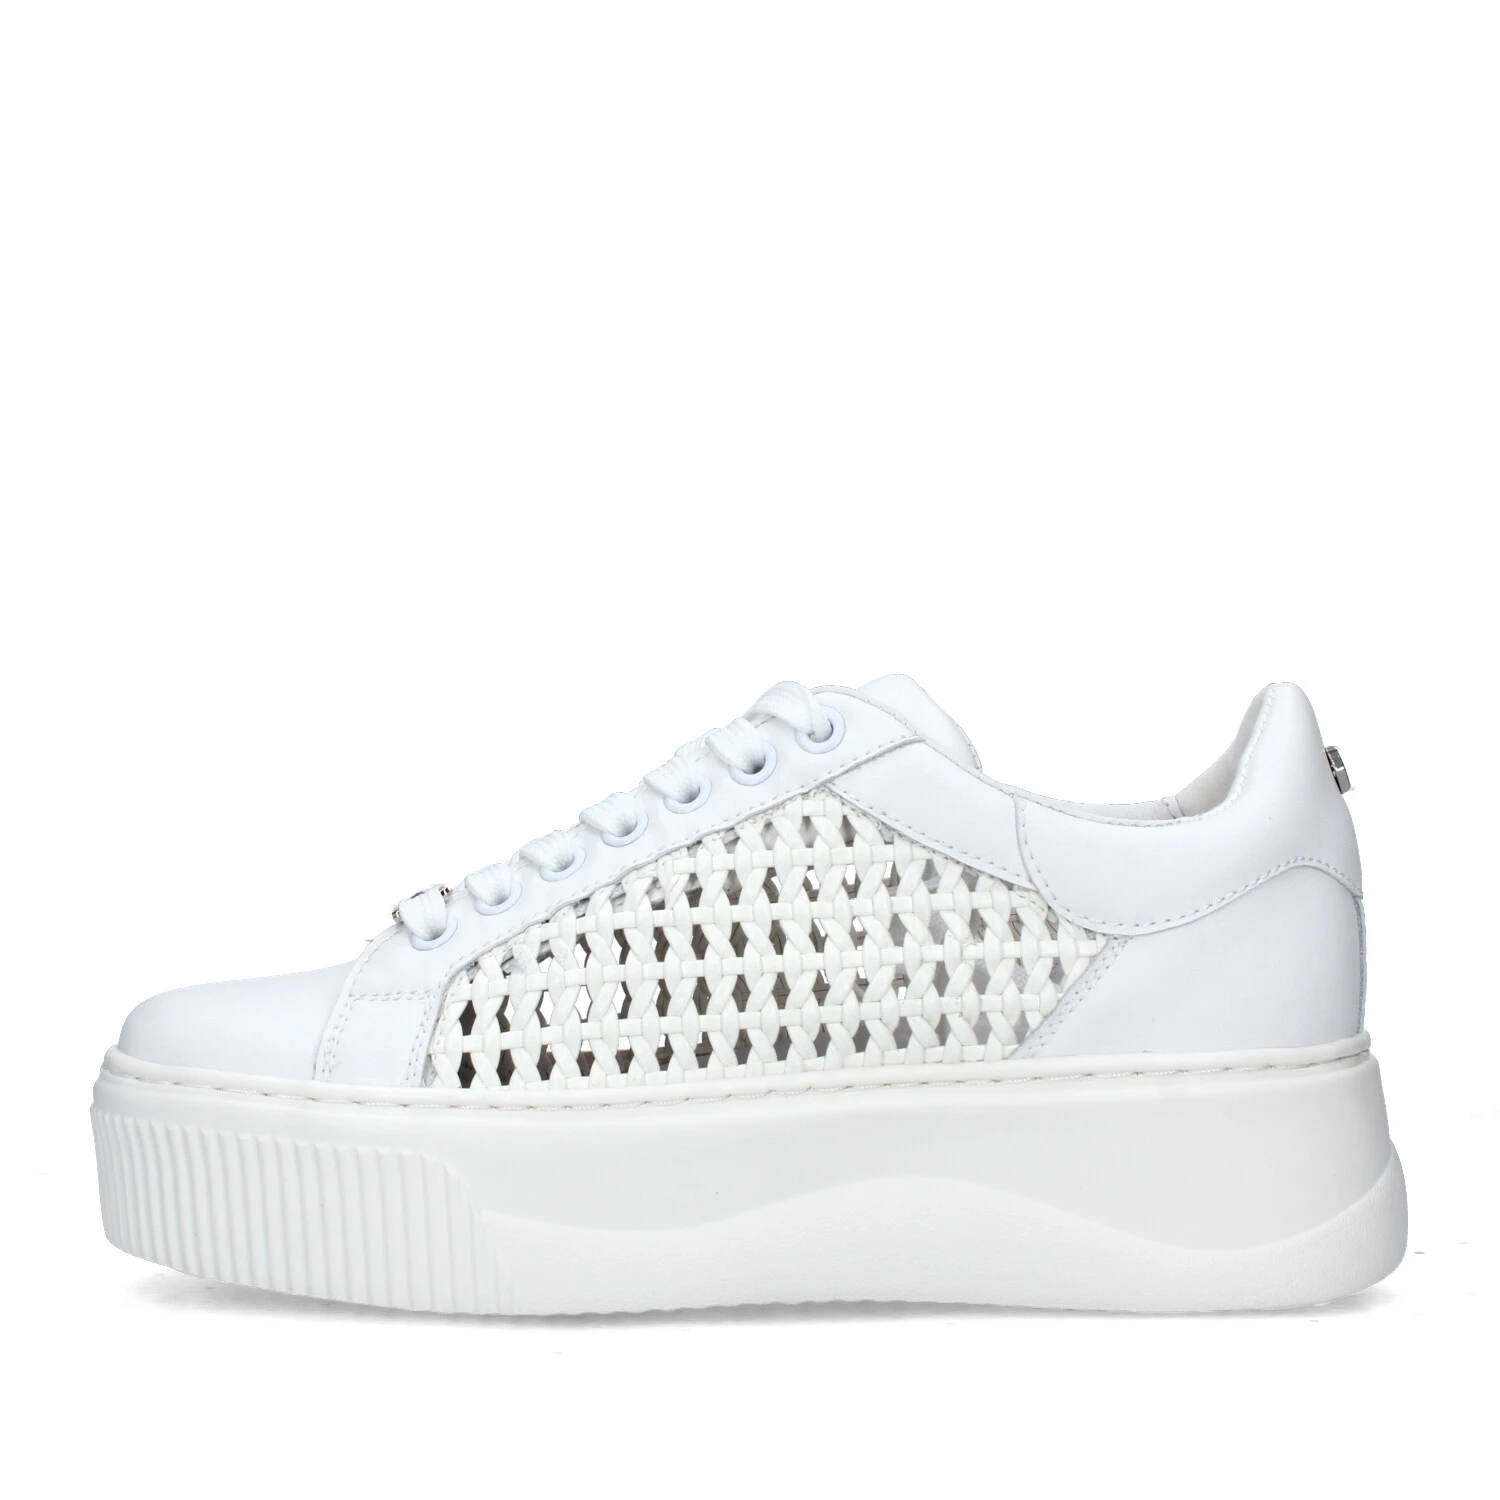 SNEAKERS PLATFORM PERRY 4237 DONNA BIANCO